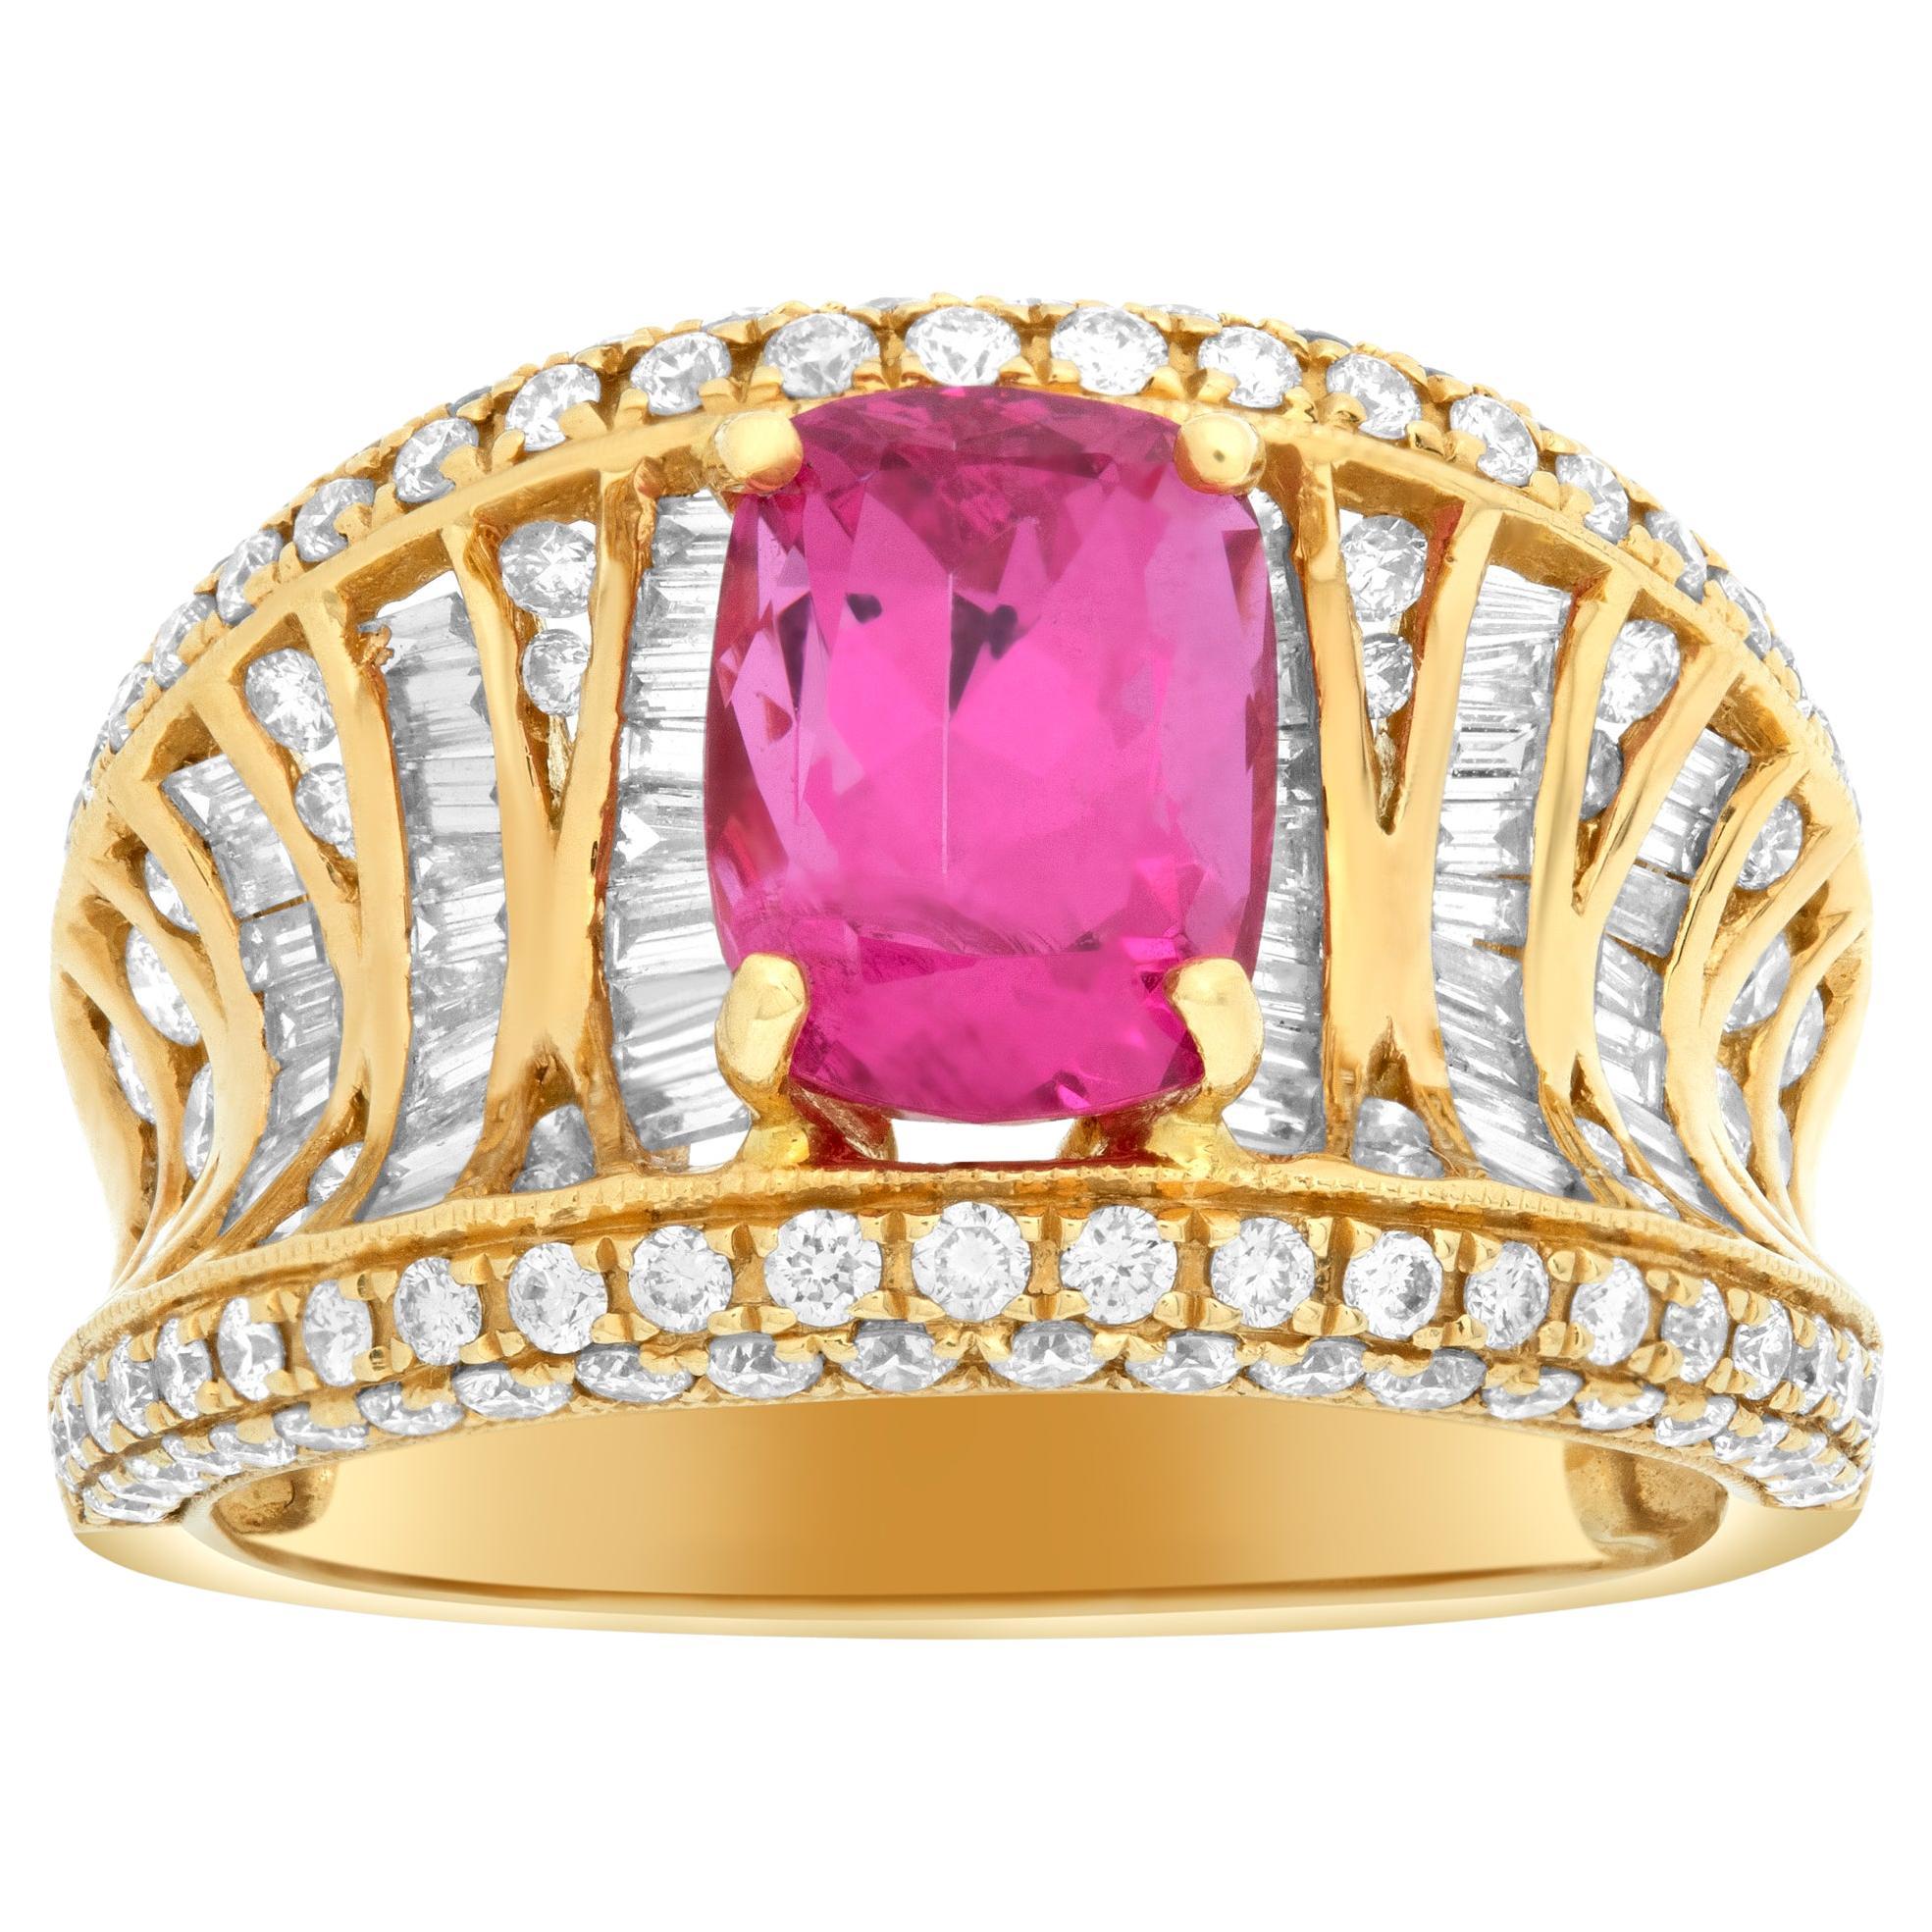 18k Yellow Gold Ring with Oval Brilliant Cut Pink Spinel '2.73 Carats' & Diamond